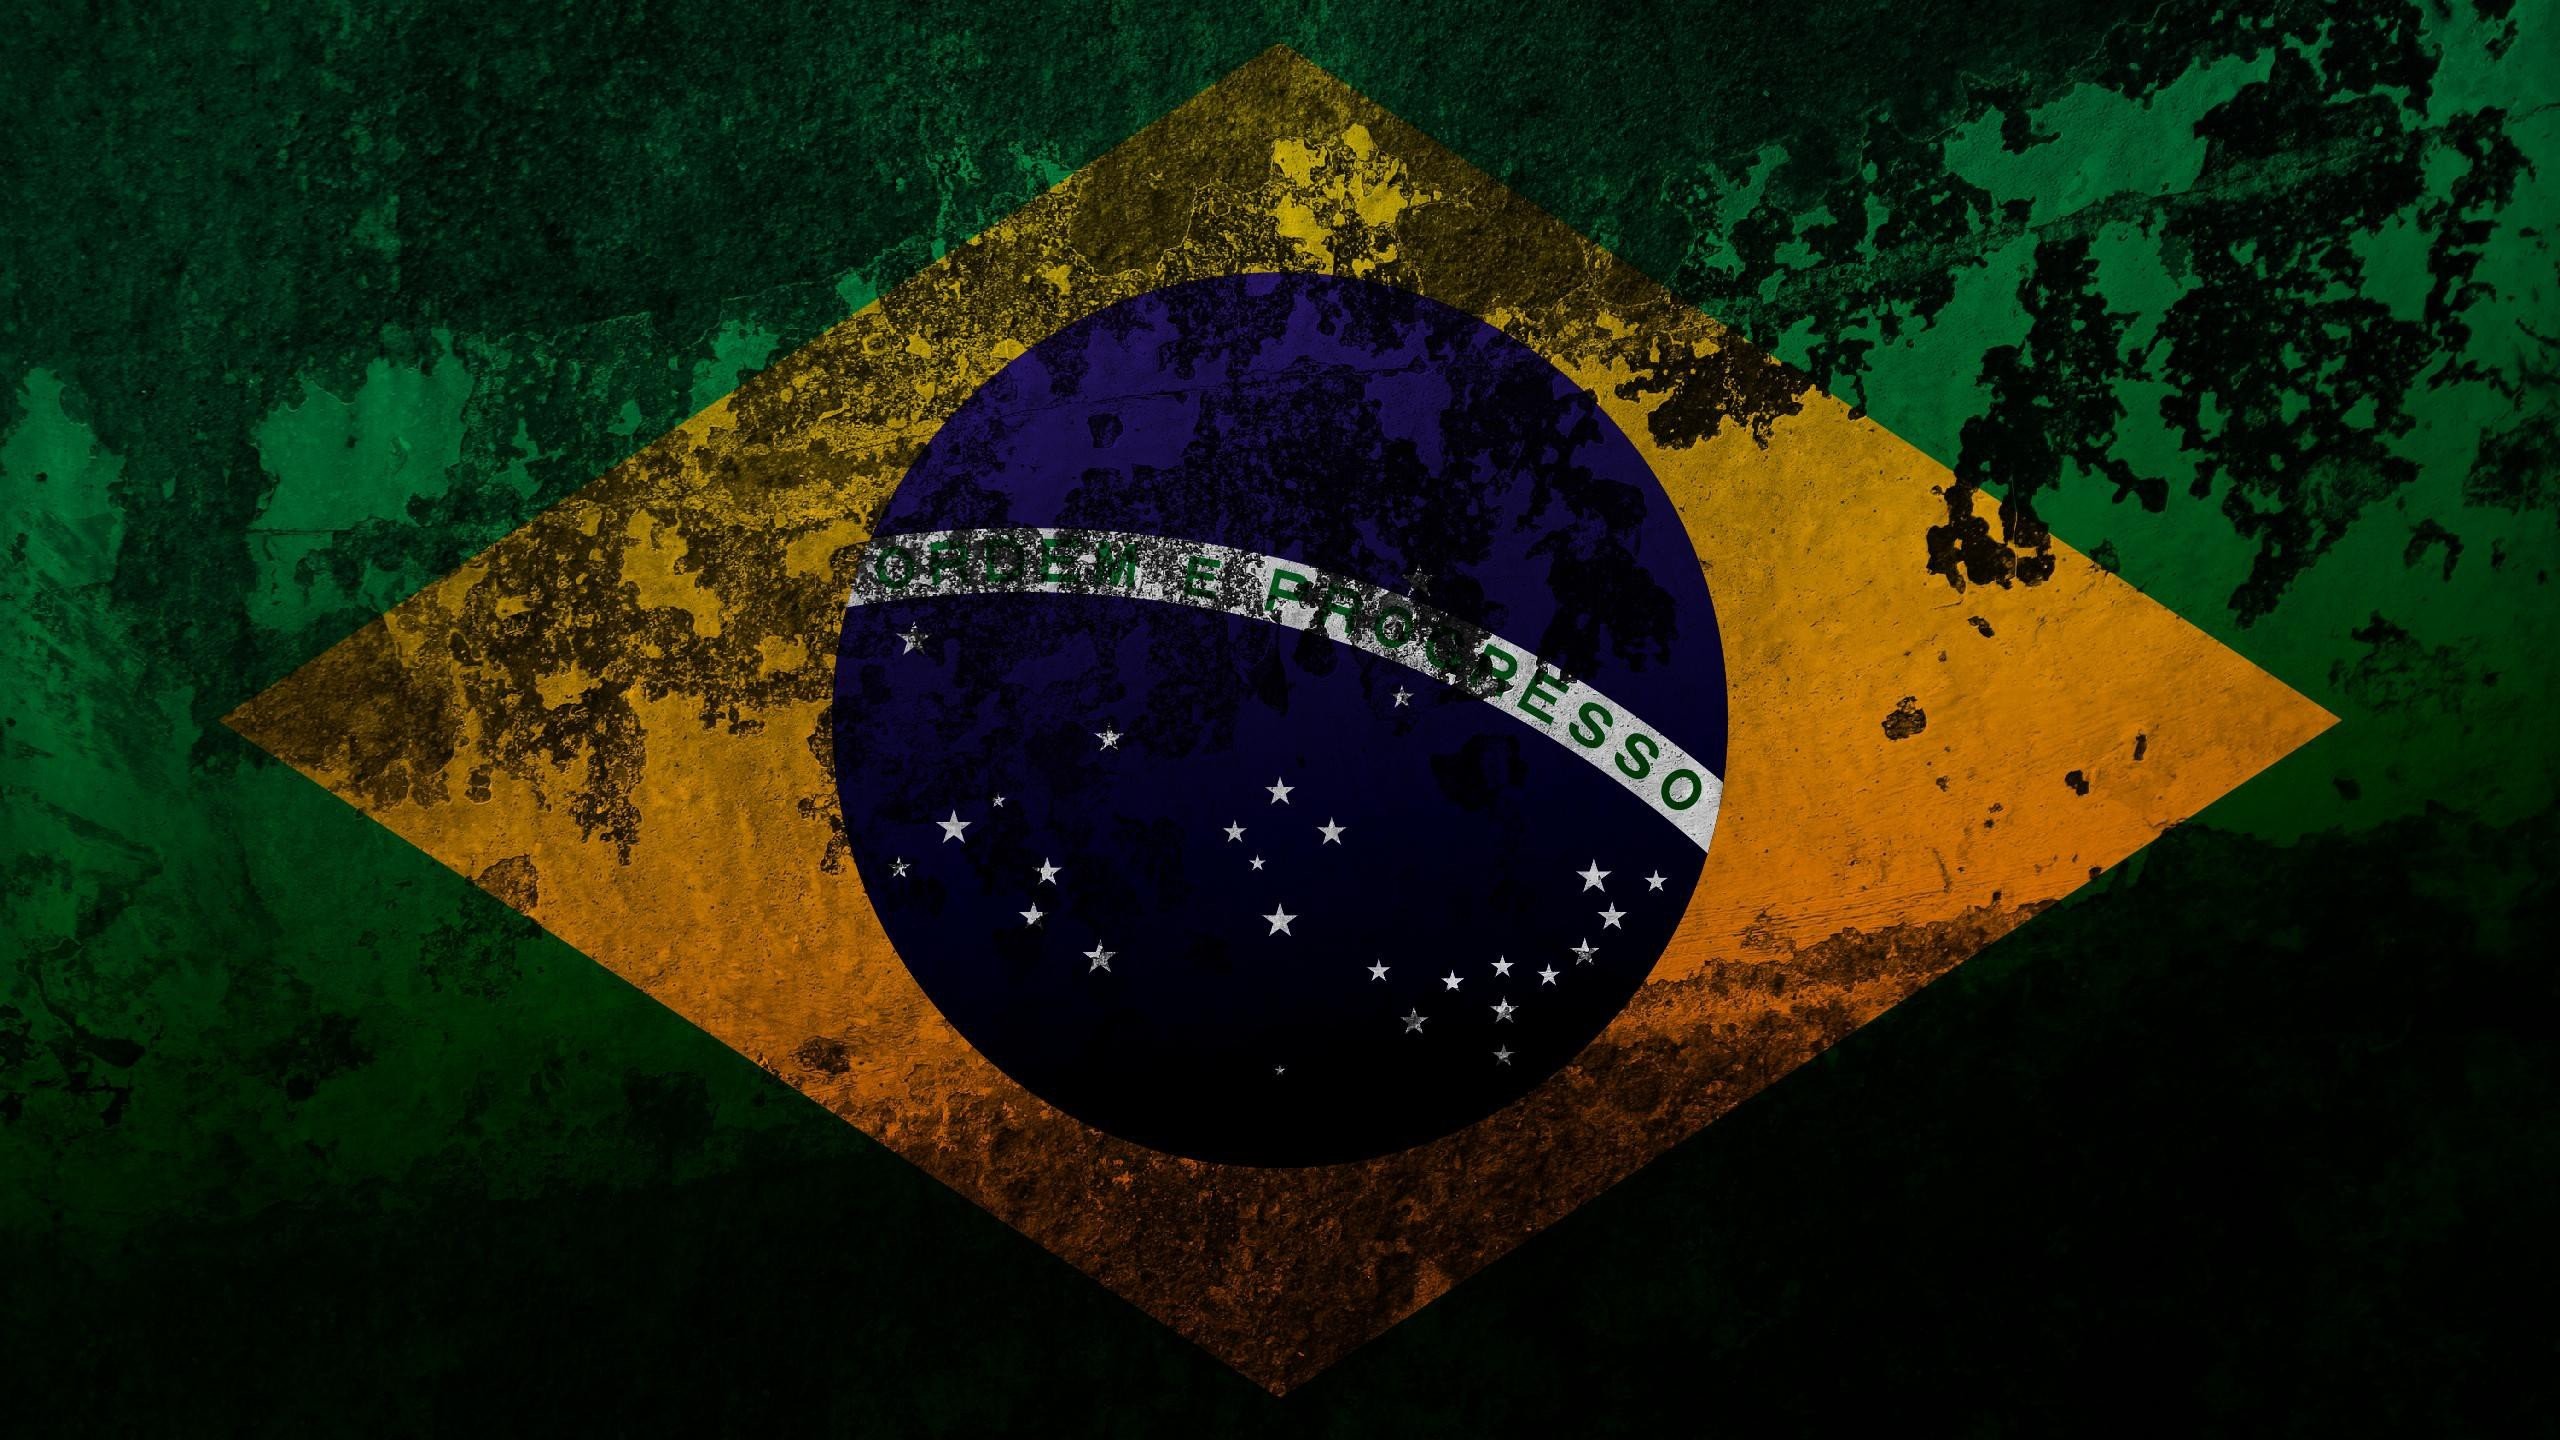 2560x1440 Brazil Flag | Brazil Flag Images, Pictures, Wallpapers on KB.iPT Wallpapers